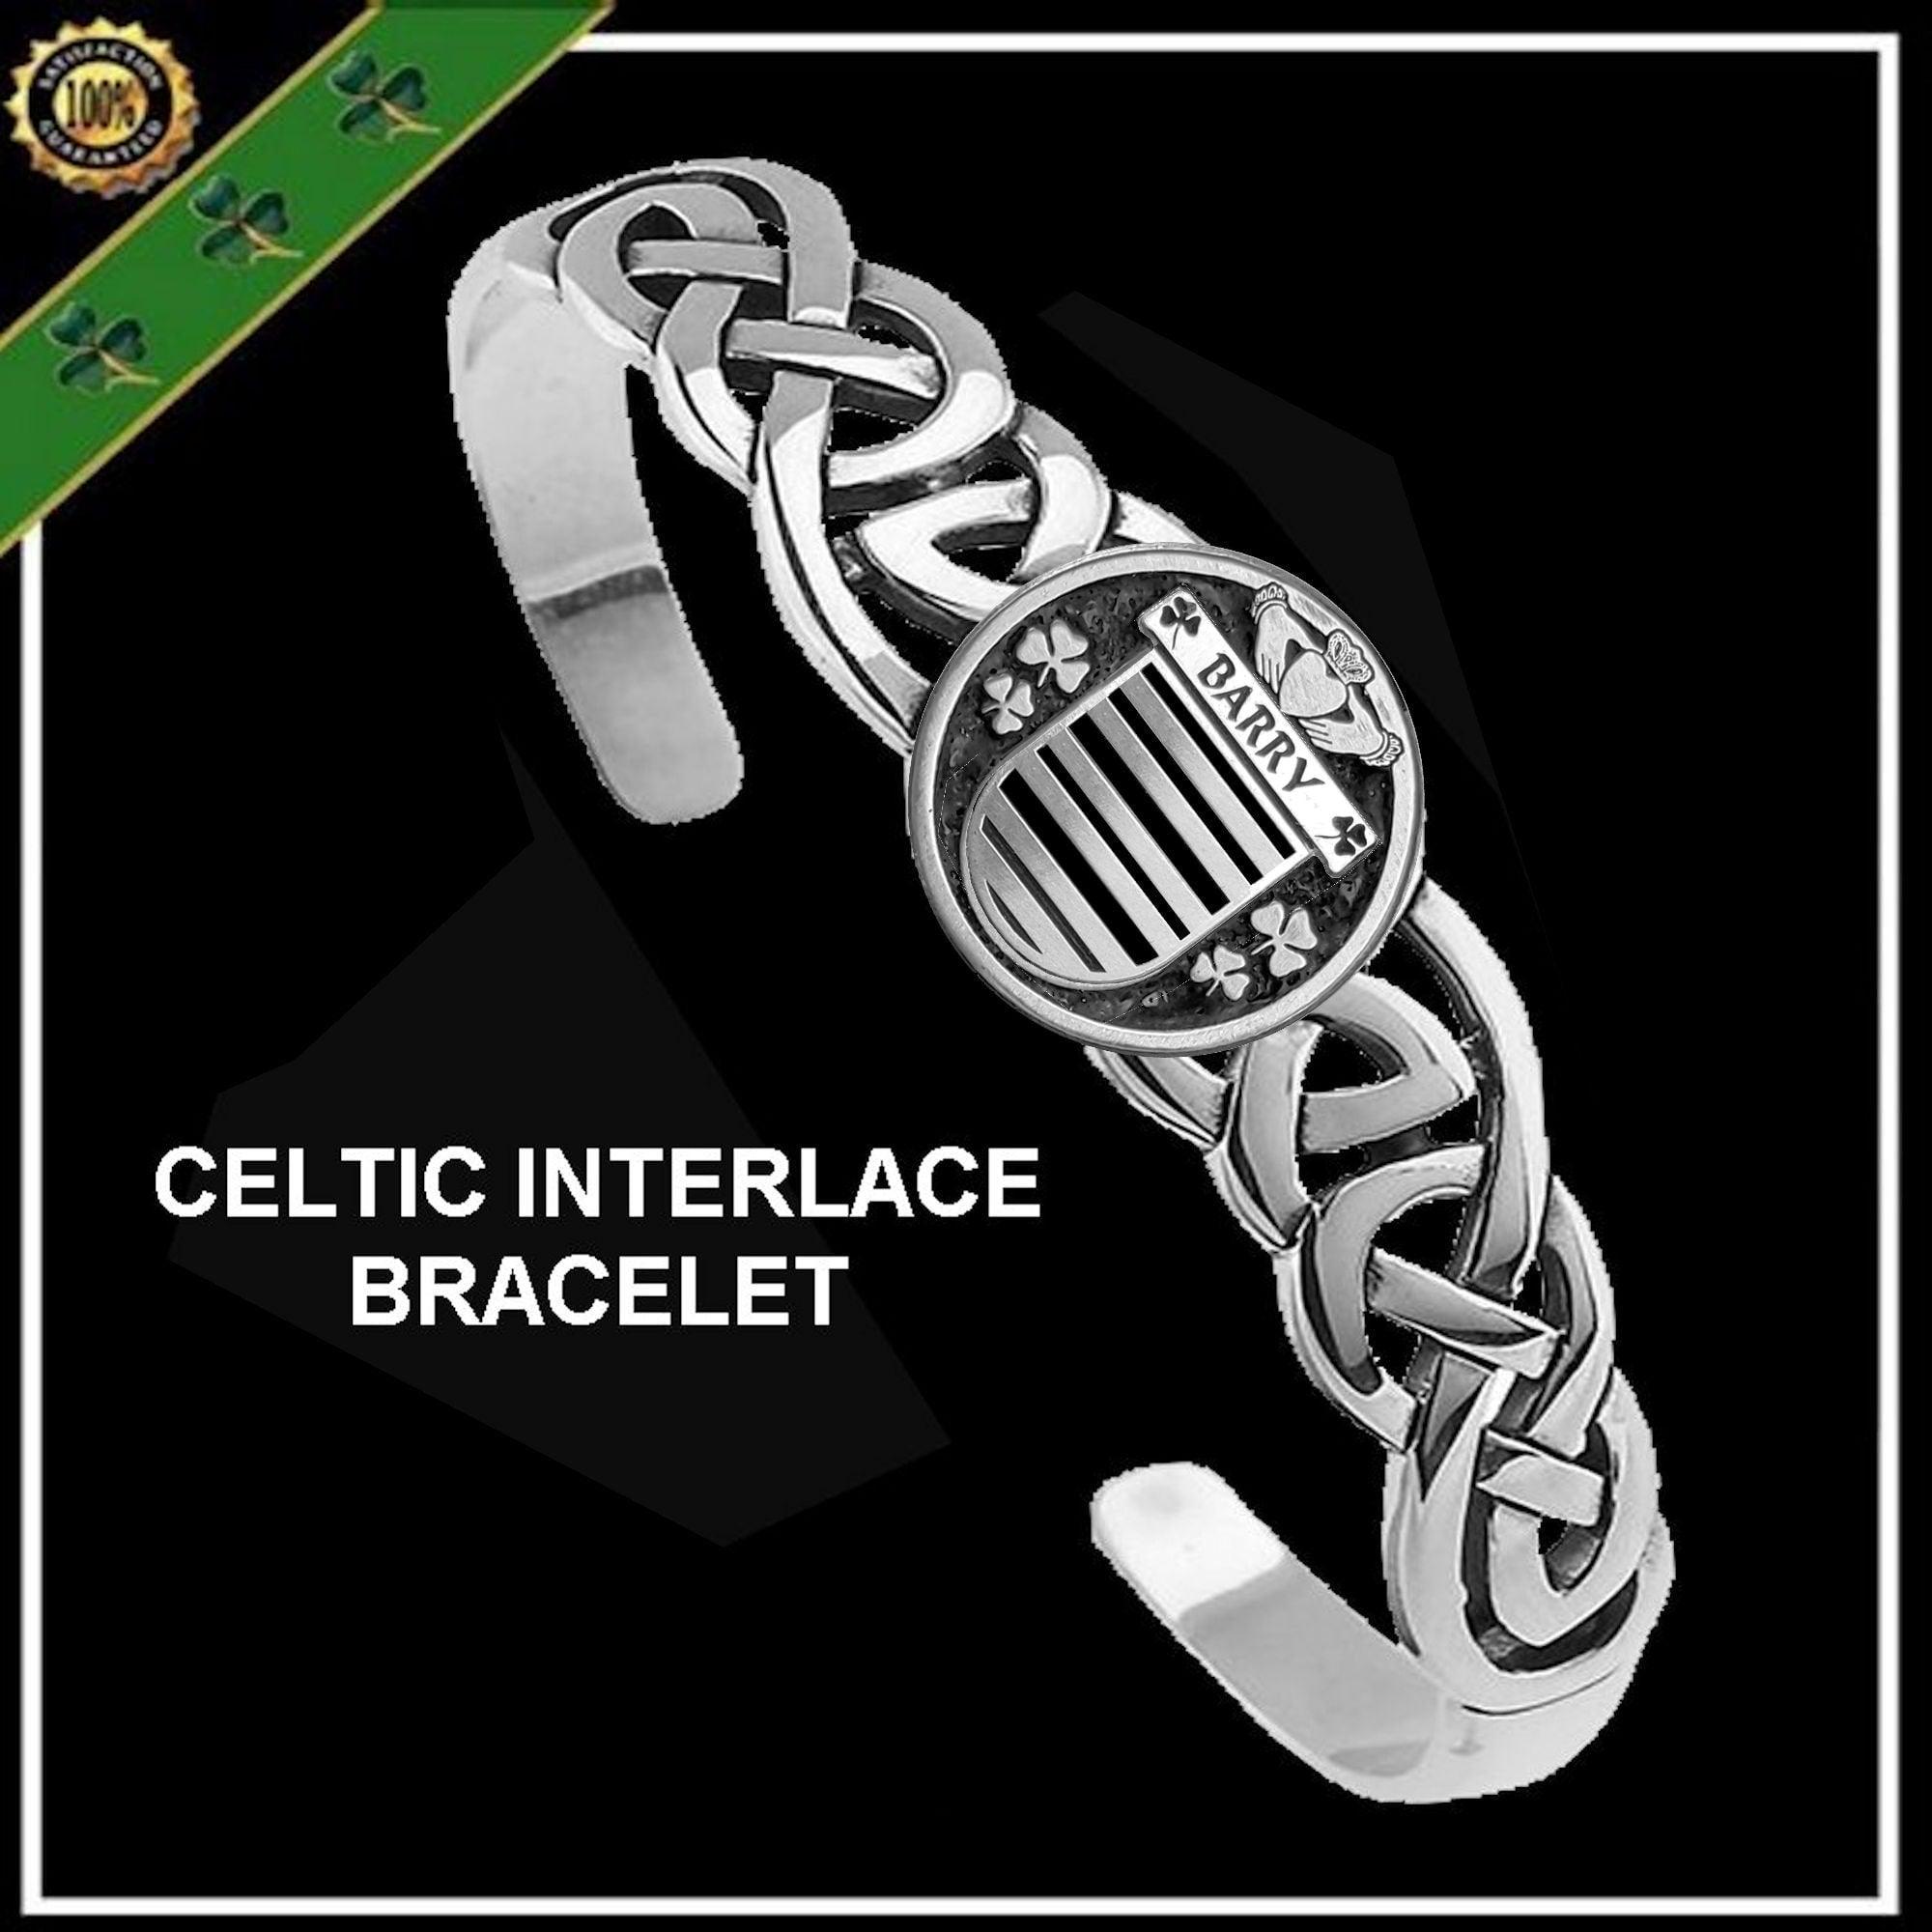 Barry Irish Coat of Arms Disk Cuff Bracelet - Sterling Silver